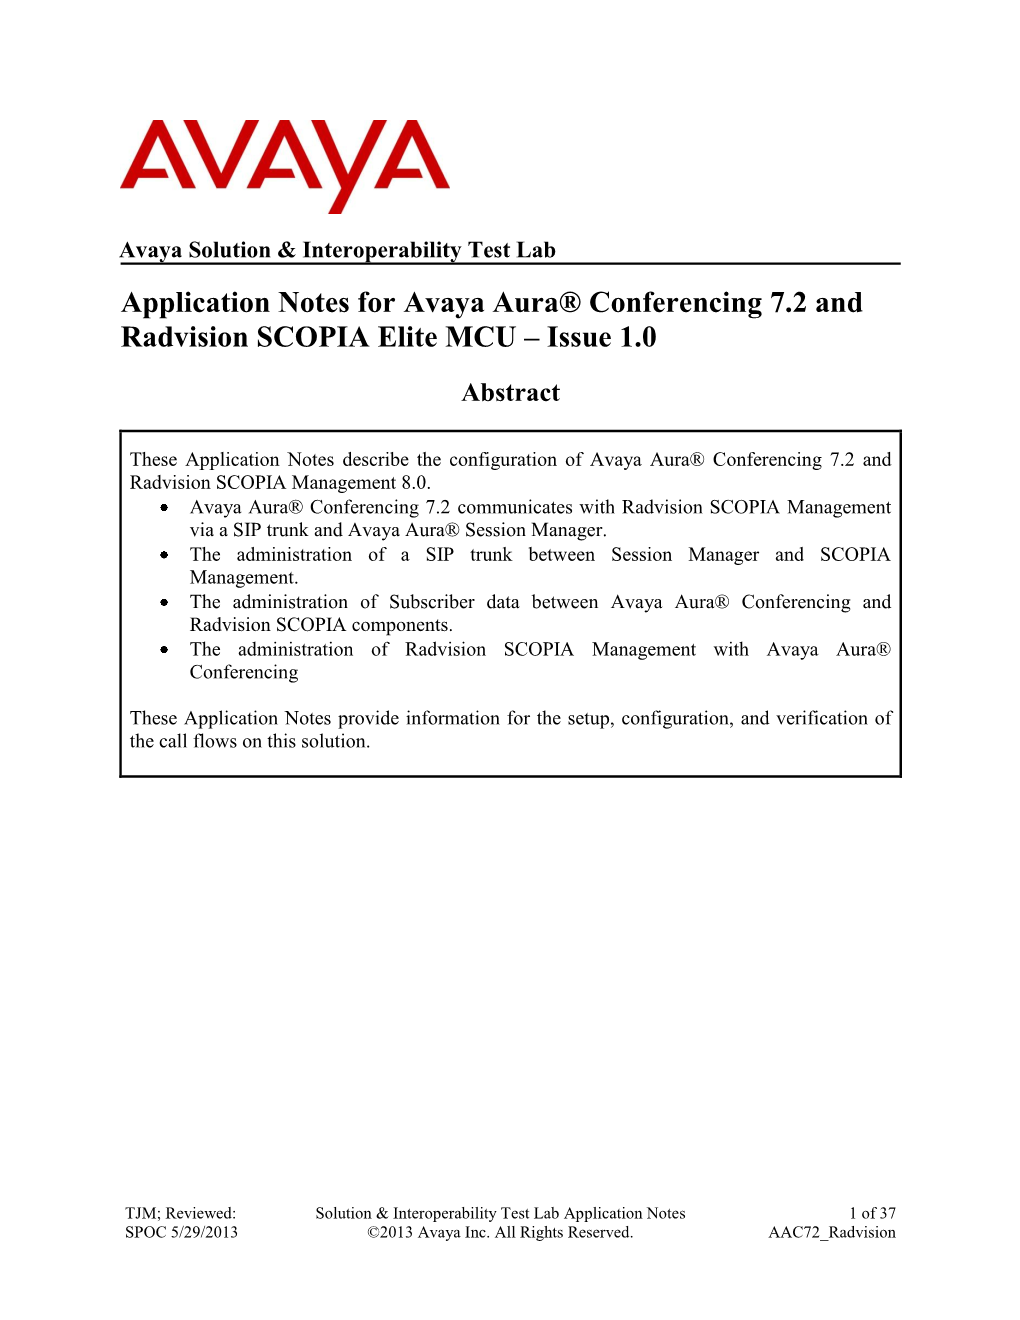 Application Notes for Avaya Aura Conferencing